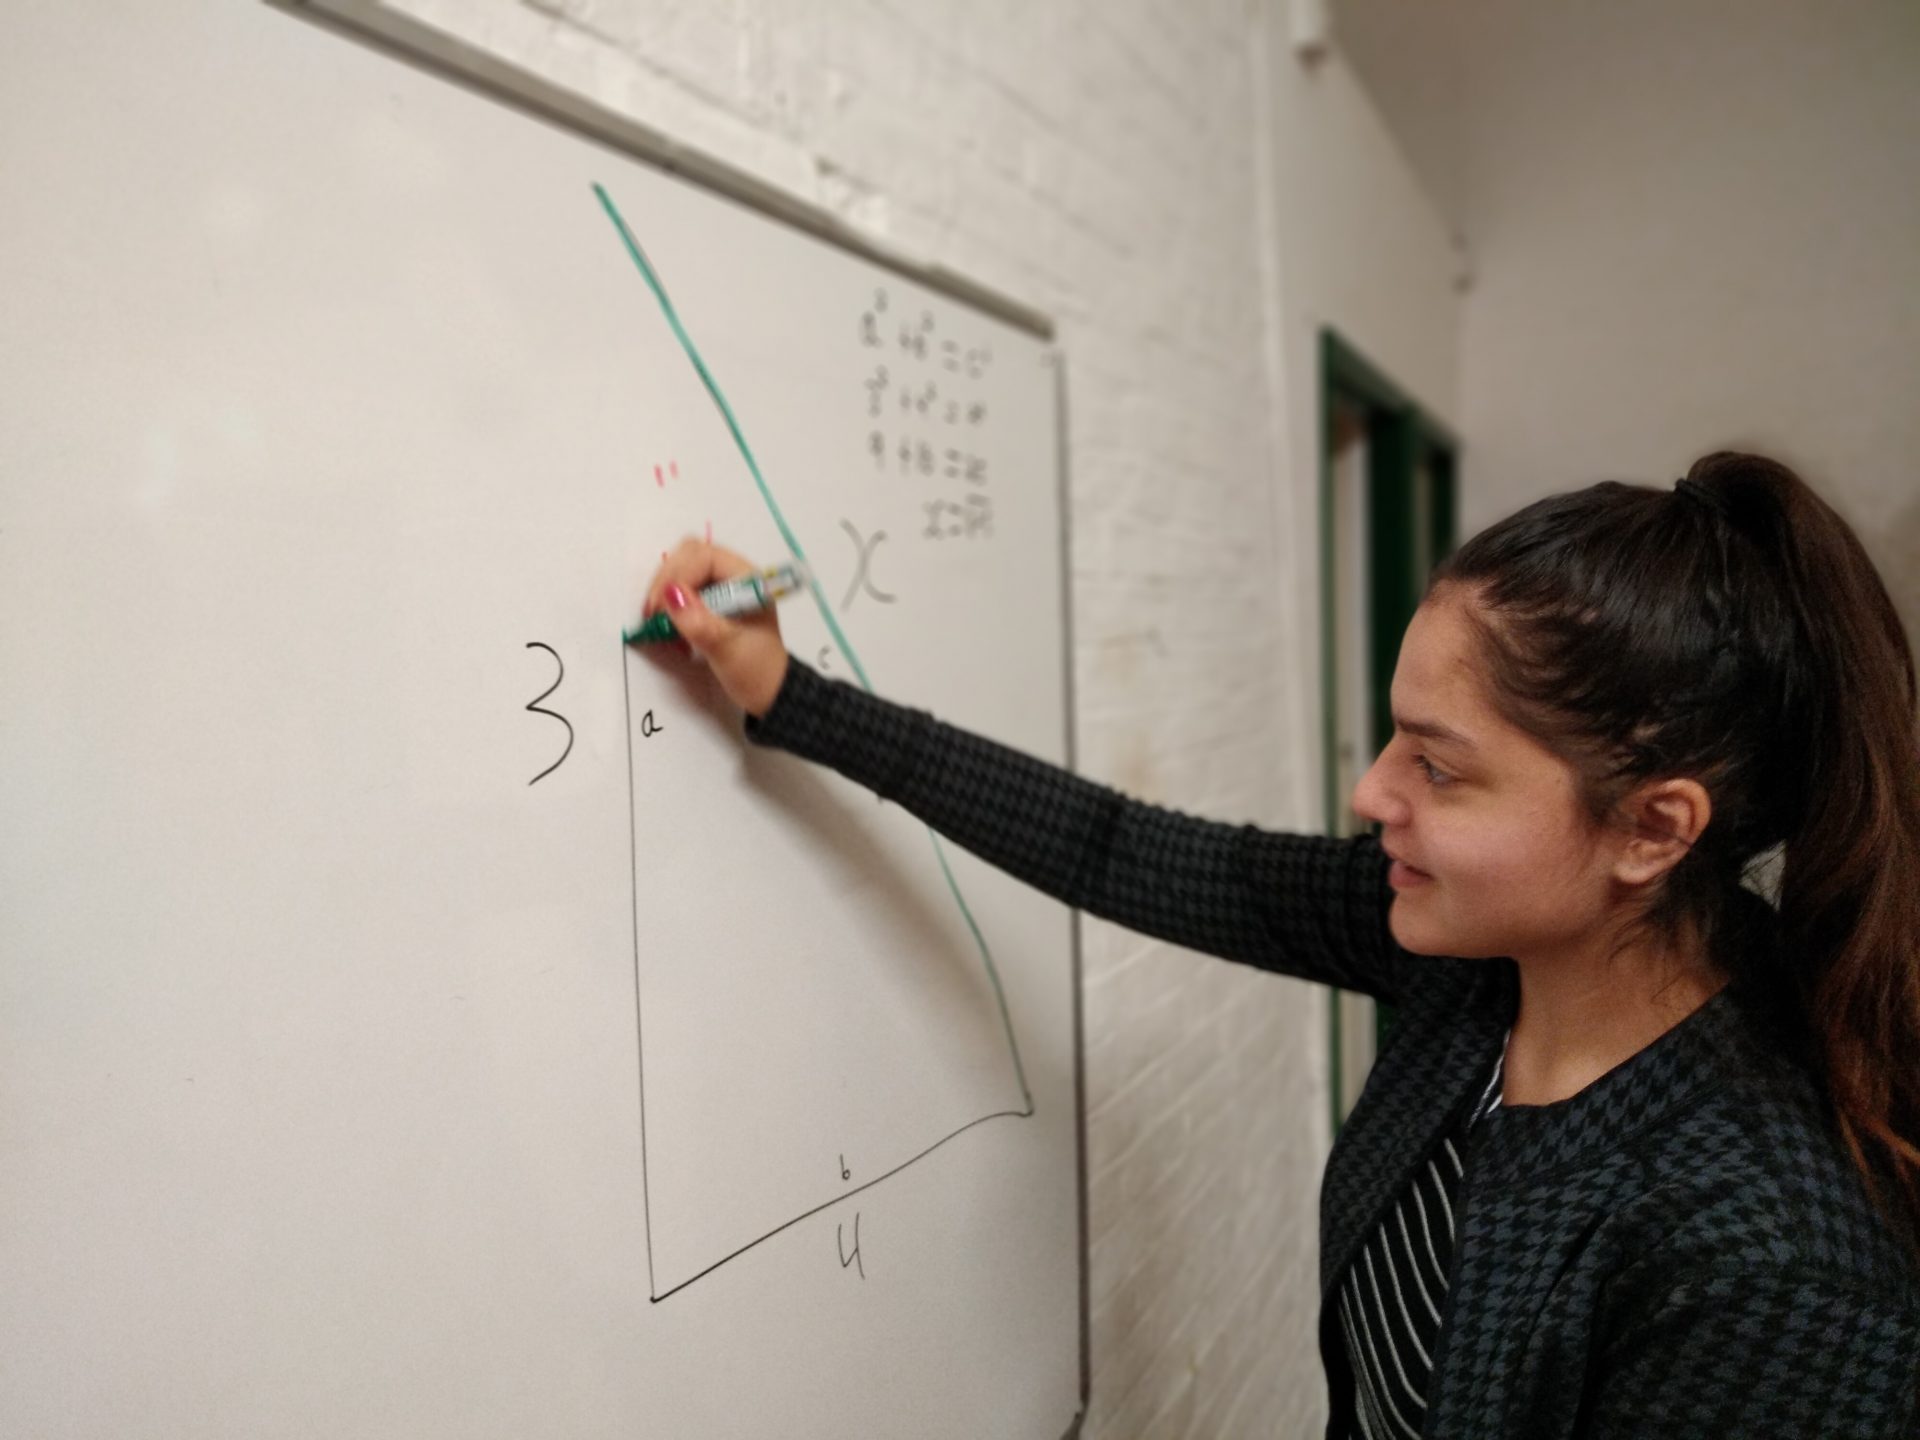 Student drawing triangle on white boards